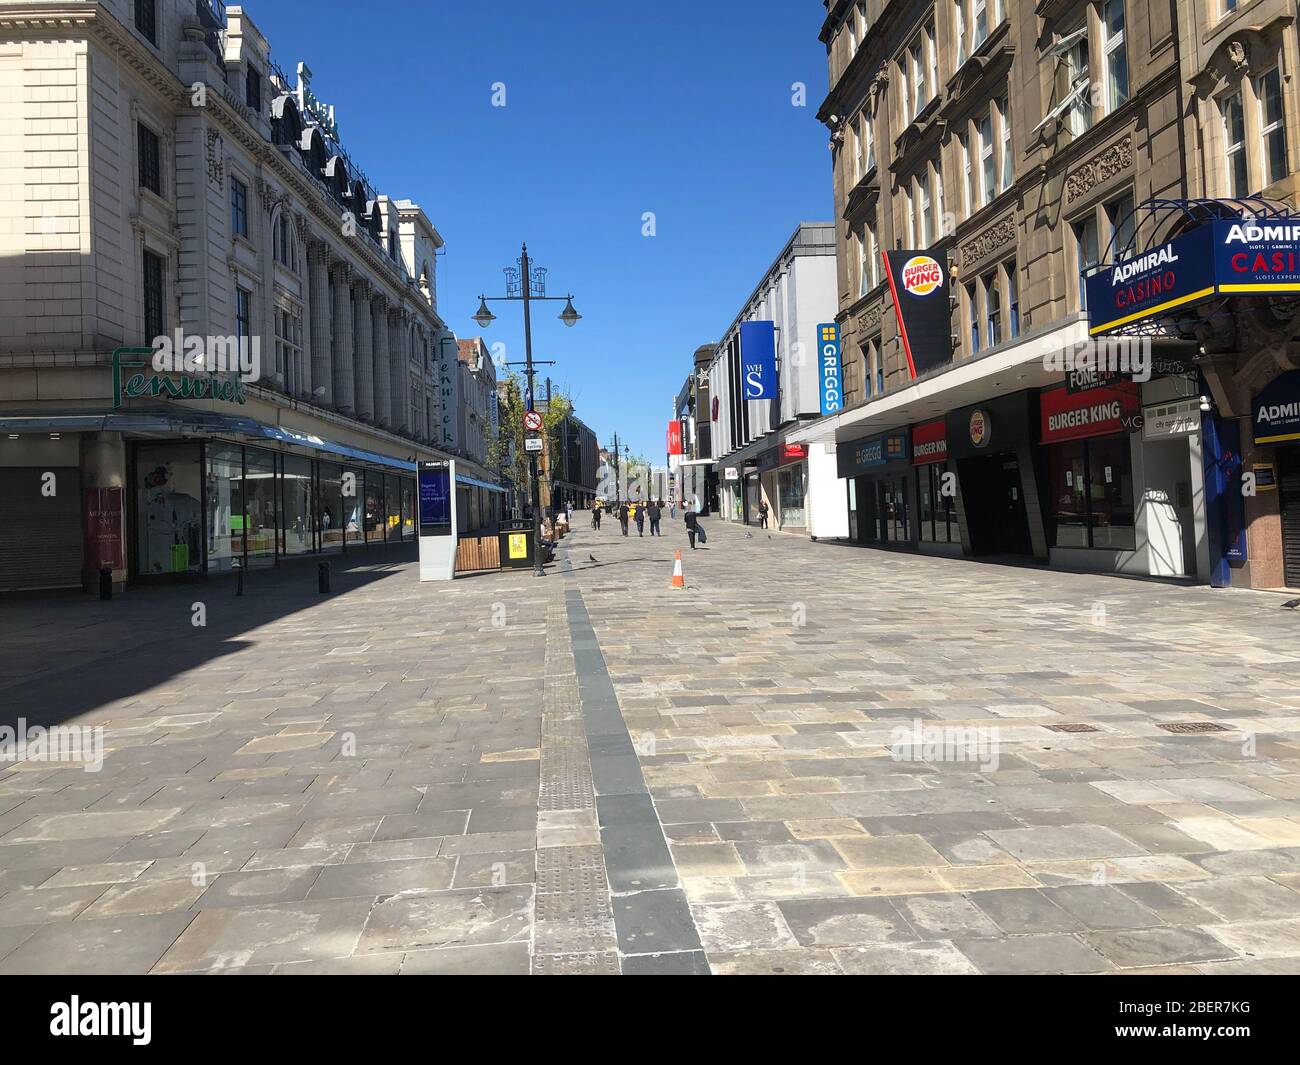 Newcastle upon Tyne, UK.  15 April, 2020.   An unusually quiet Northumberland Street, Newcastle upon Tyne during the Coronavirus Covid19 lockdown/social-distancing period.  Most people continue to respect the government dictate to socially distance.  Victor W. Adams / Alamy Live News Stock Photo